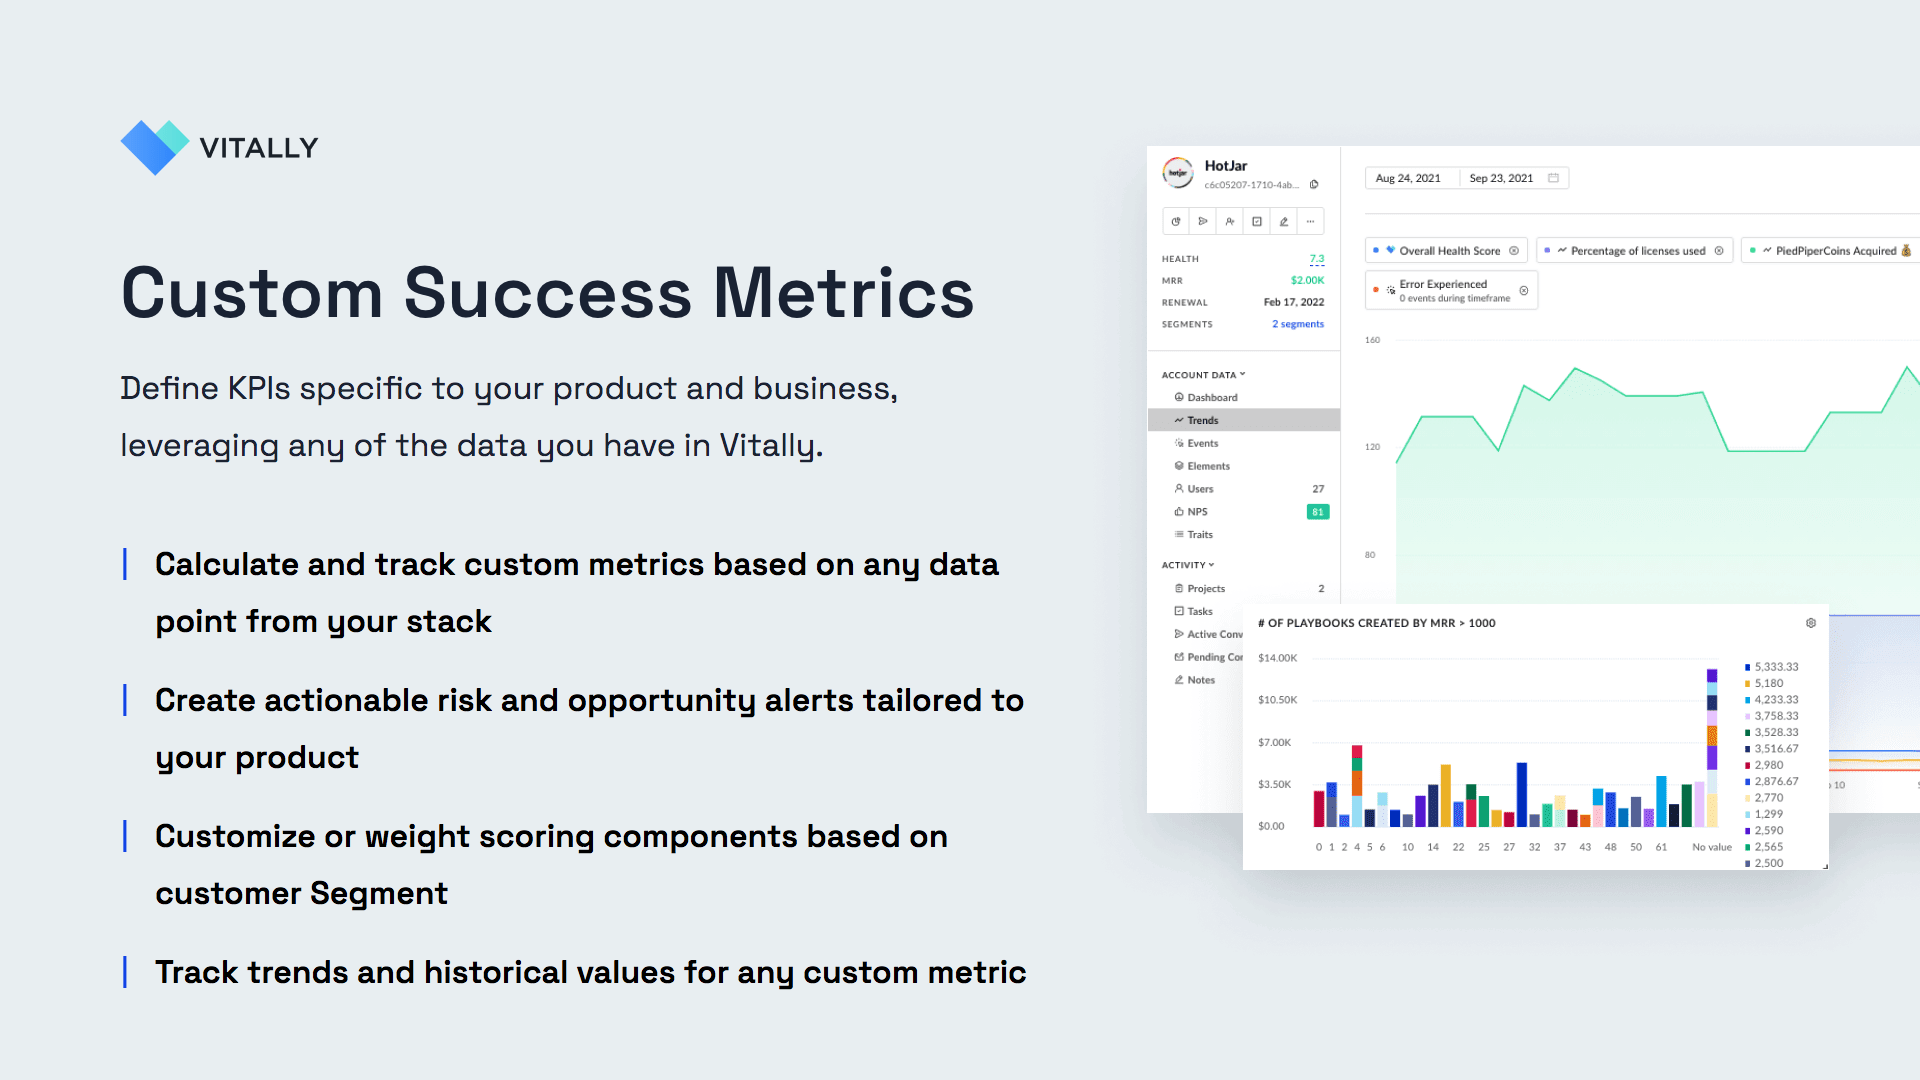 Custom Metrics -- Define KPIs specific to your product and business, leveraging any of the data you have in Vitally.